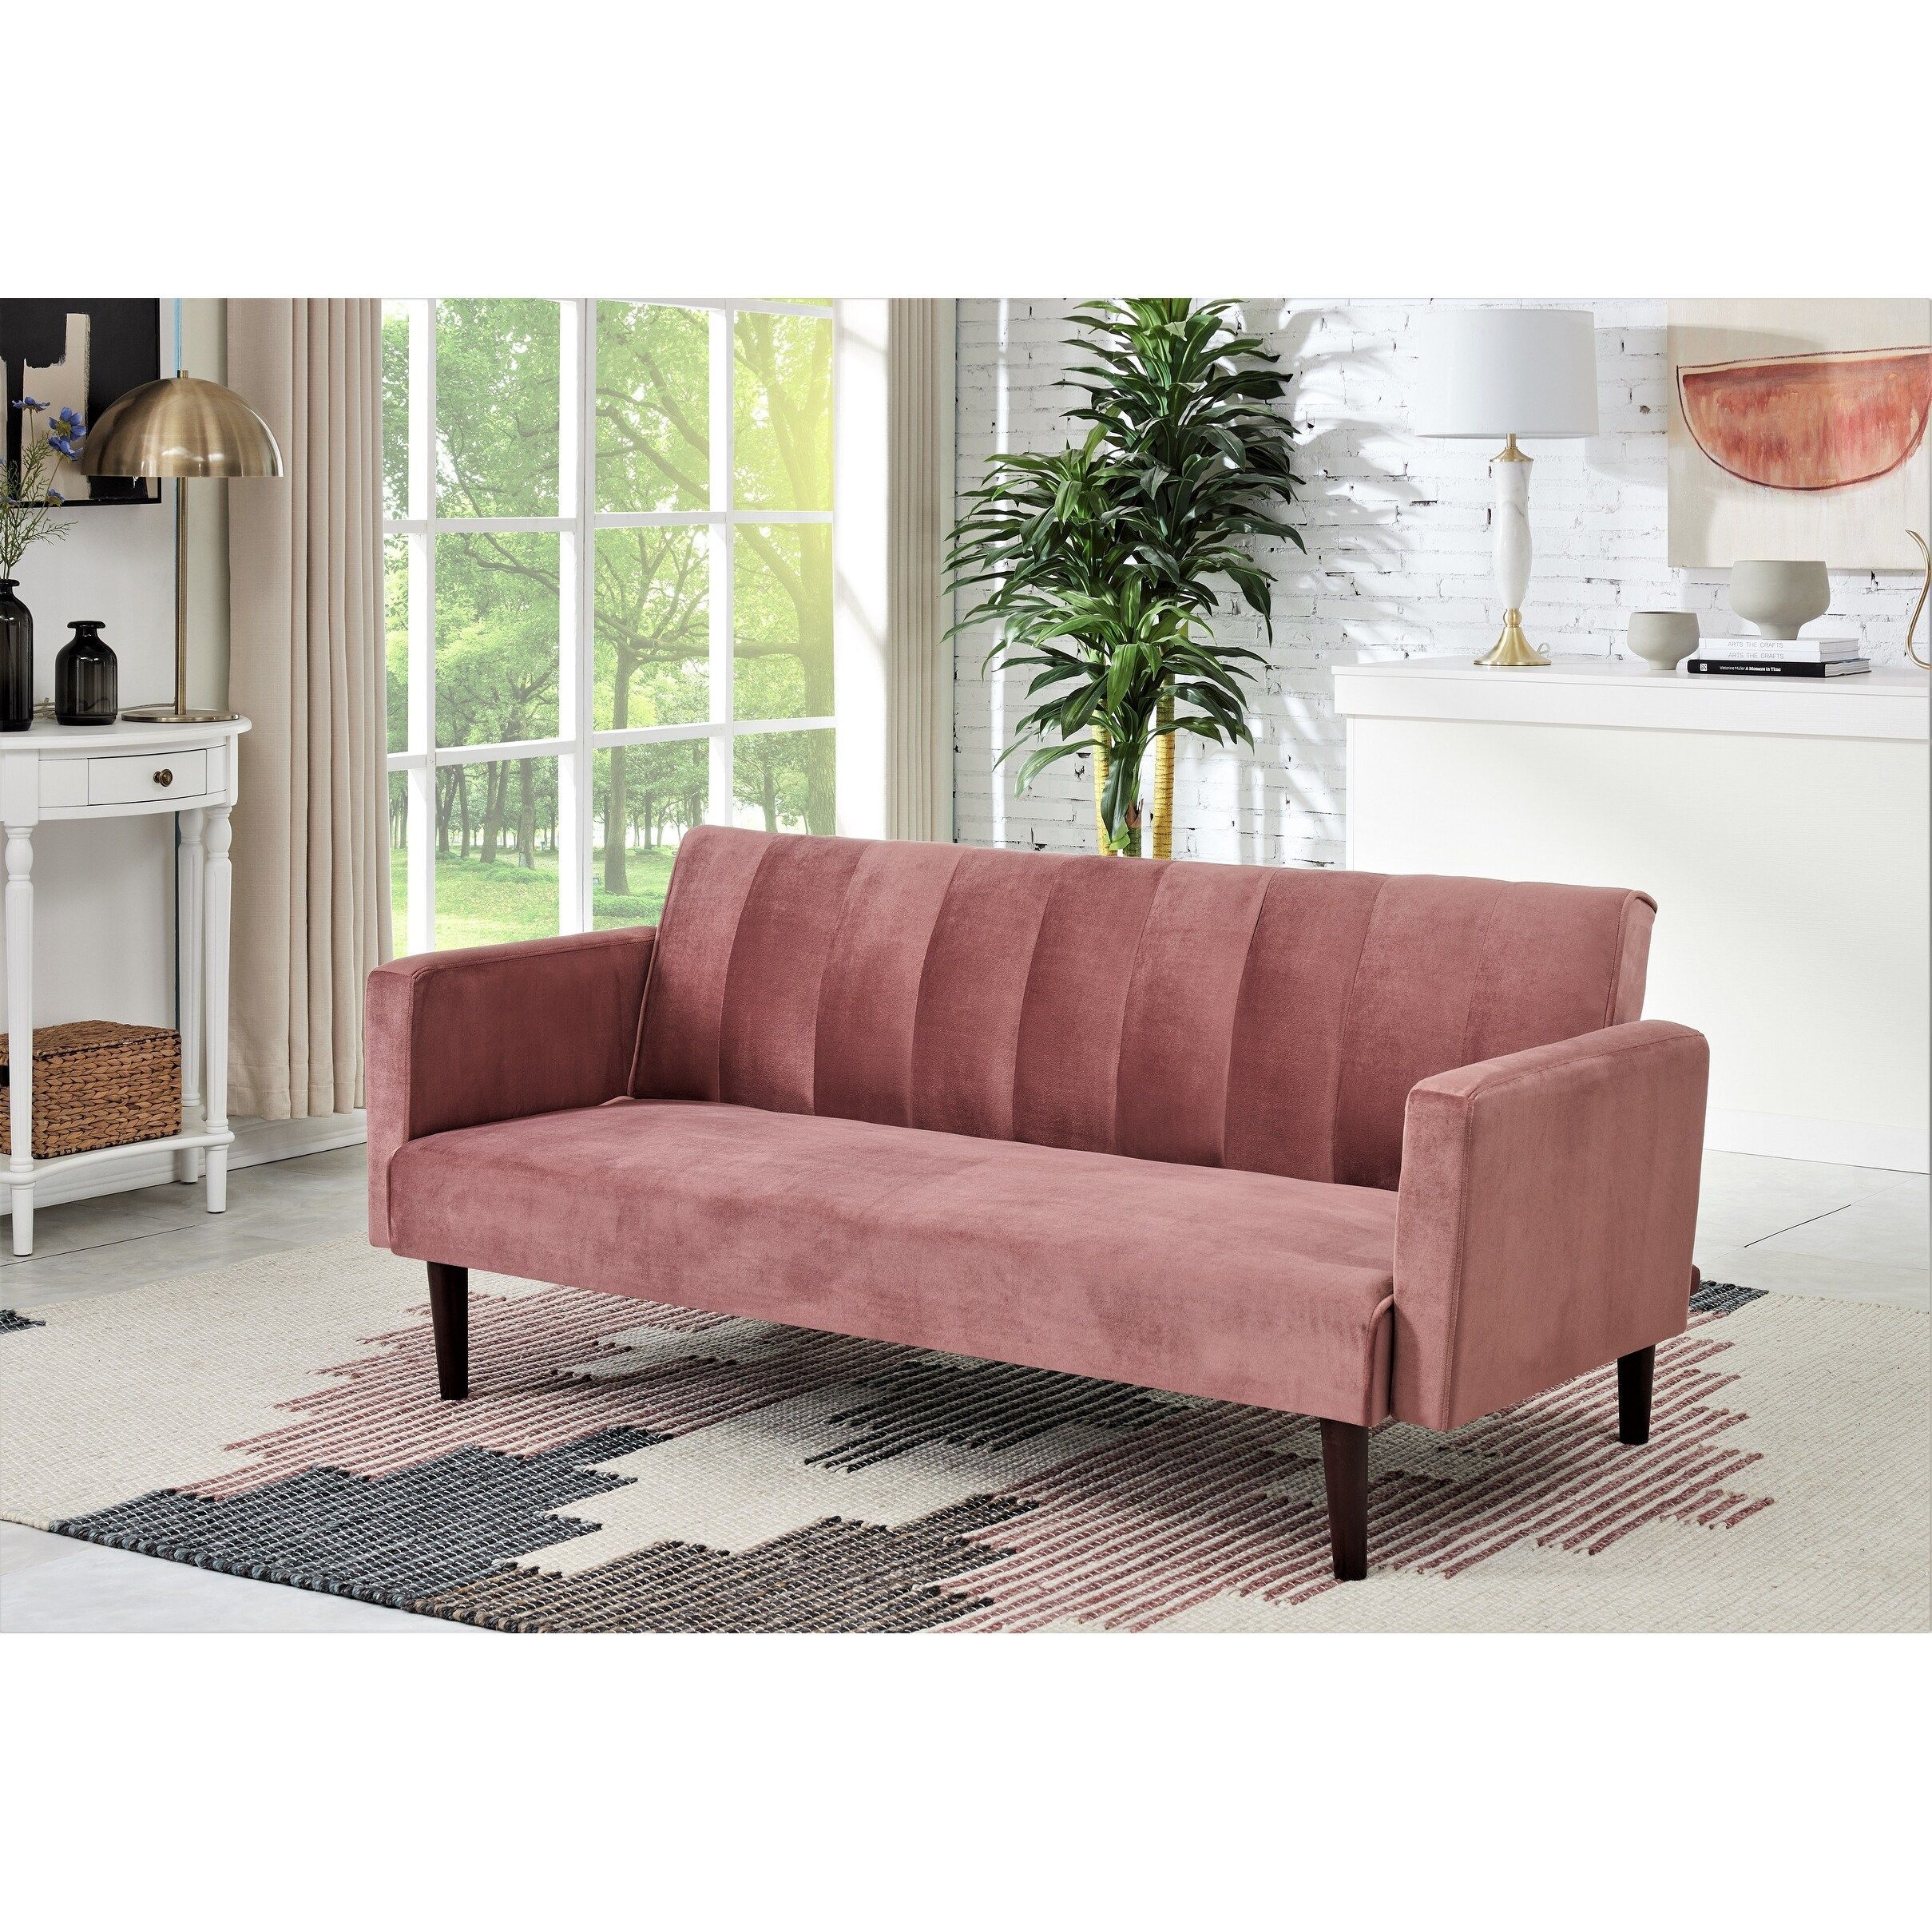 Container Furniture Srtip Convertible Velvet Sofa Bed – Overstock Pertaining To 66" Convertible Velvet Sofa Beds (View 4 of 15)